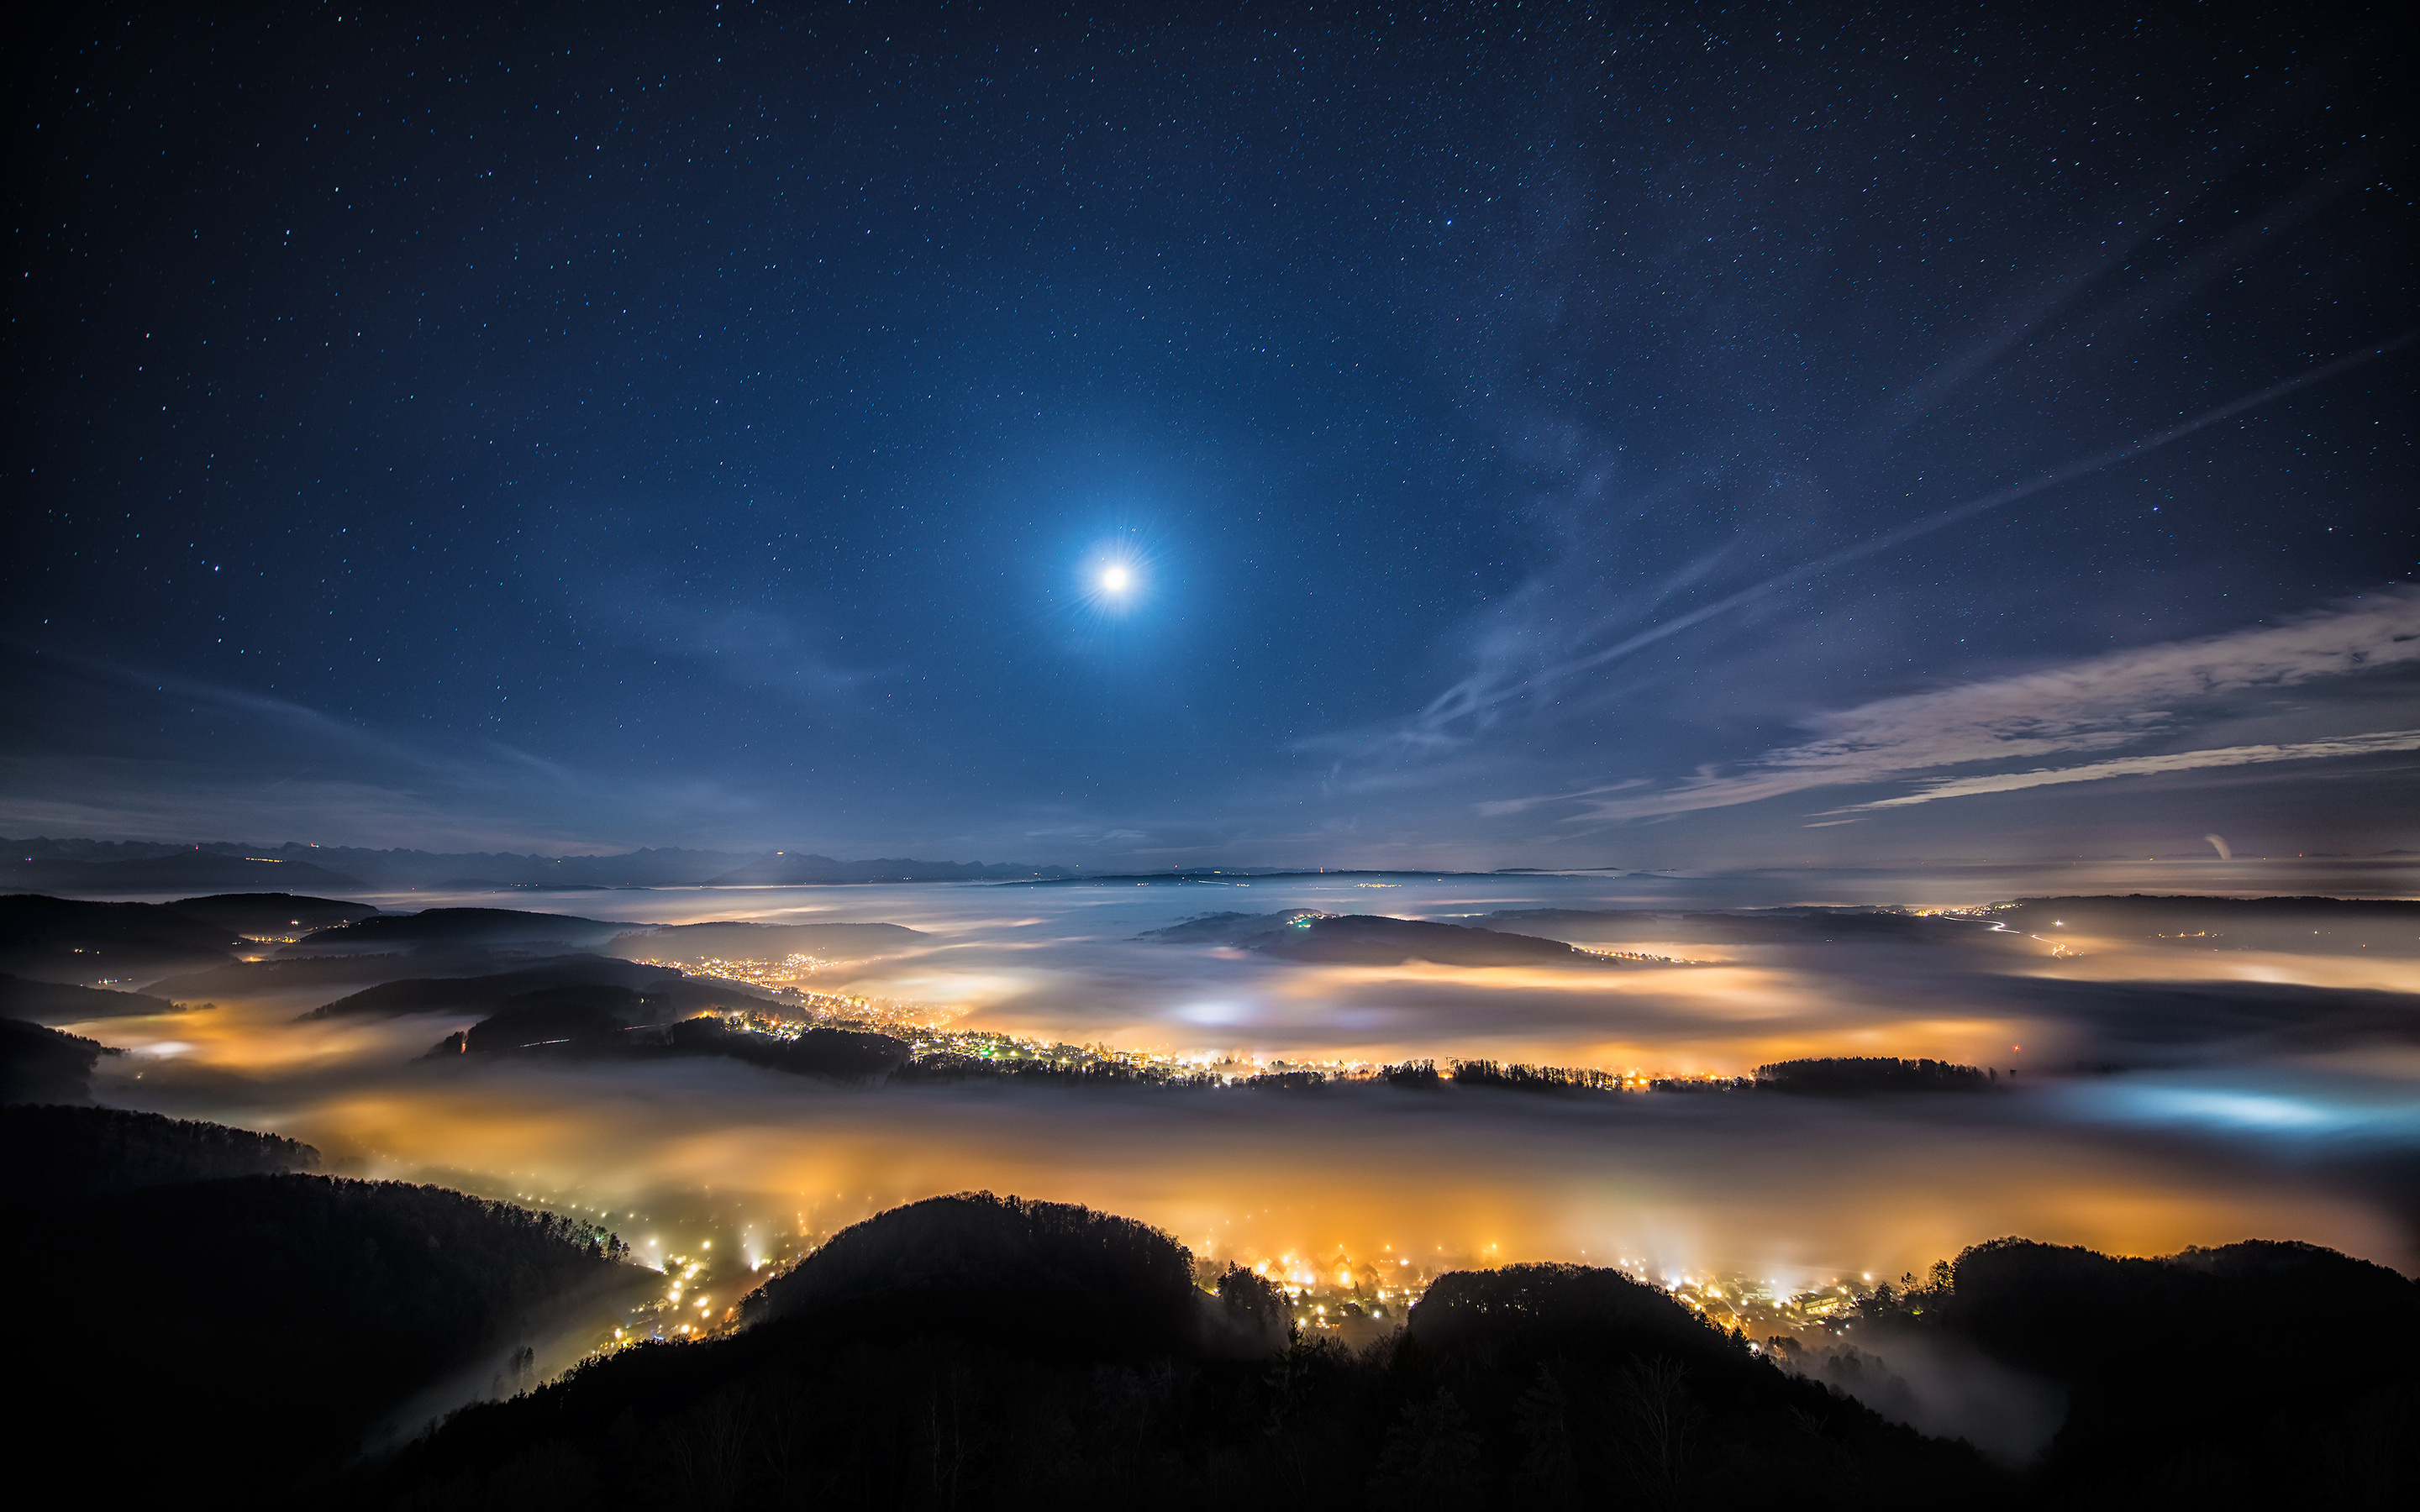 Wallpaper, sunlight, mountains, city, night, sky, sunrise, evening, moonlight, horizon, atmosphere, Switzerland, dusk, Alps, astronomy, cloud, fog, dawn, darkness, afterglow, outer space, astronomical object 2880x1800 Wallpaper